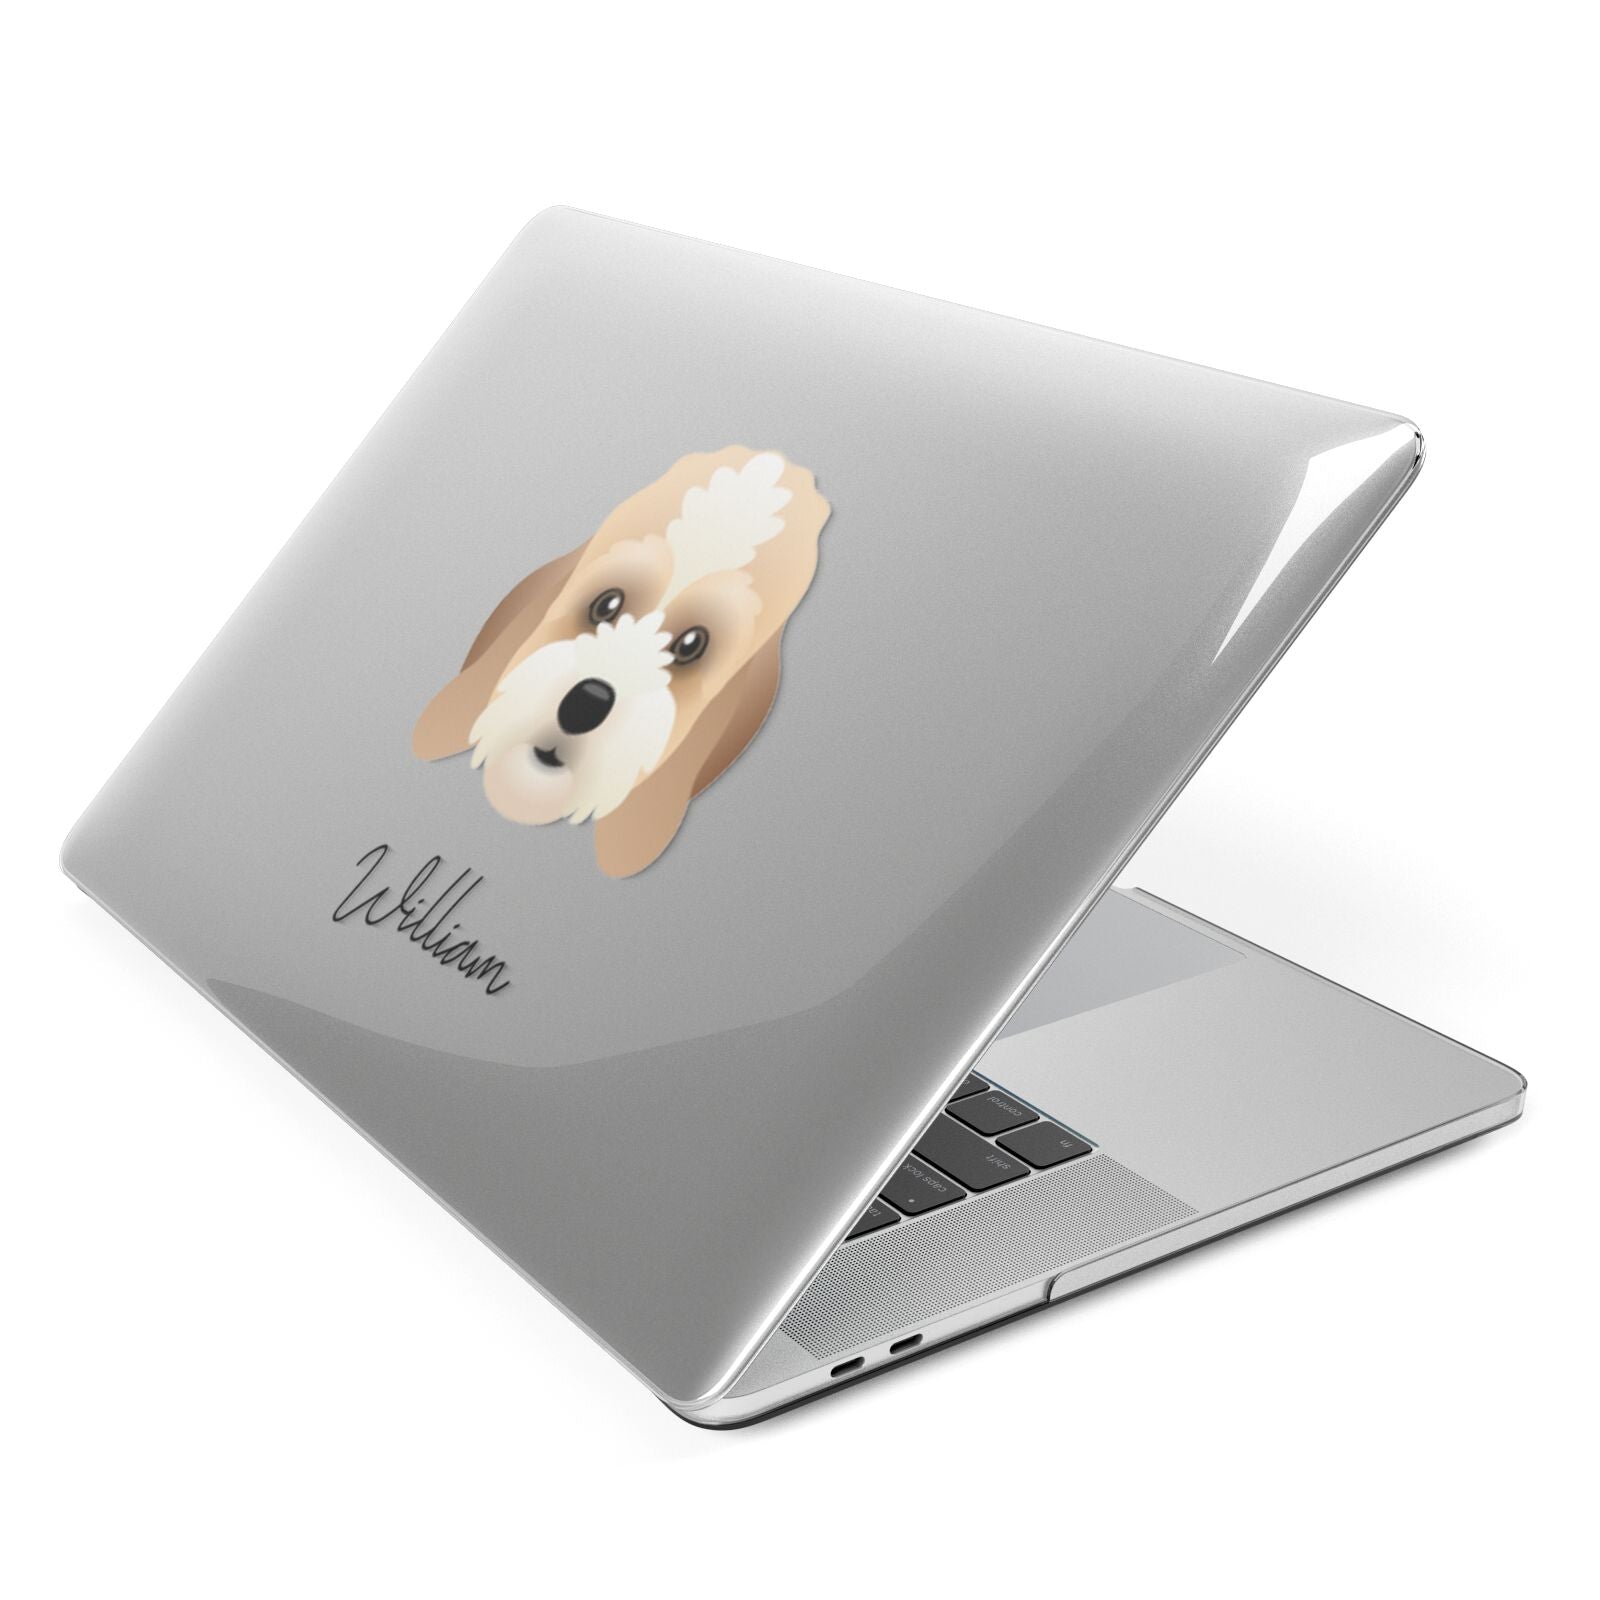 Lhasapoo Personalised Apple MacBook Case Side View